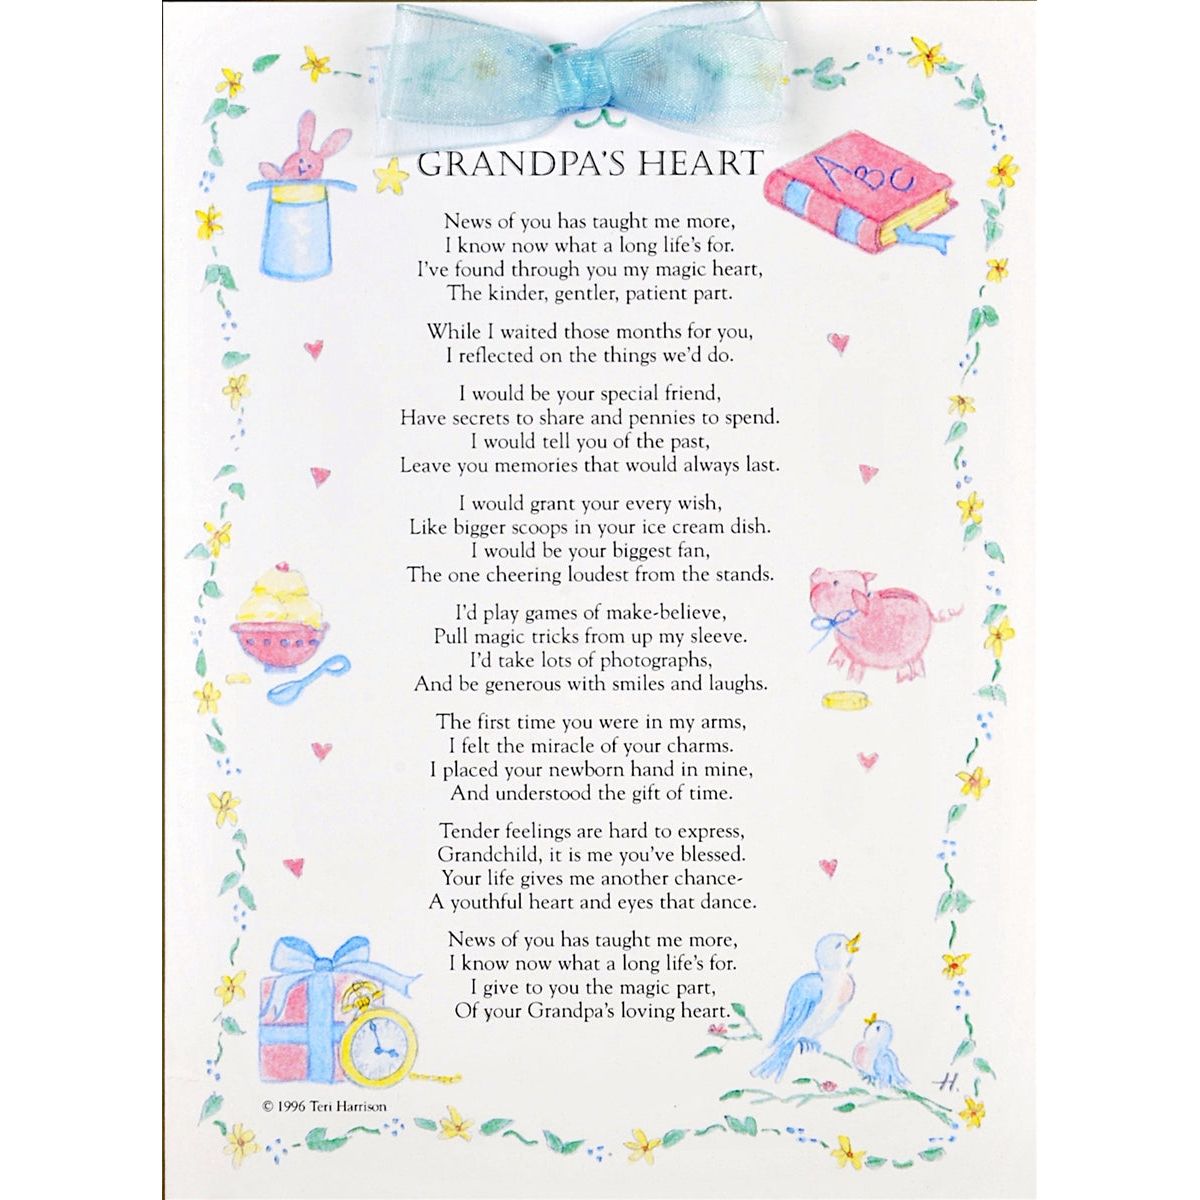 Grandpa's Heart poem new baby greeting card 5x7 with envelope and blue organza accent ribbon.